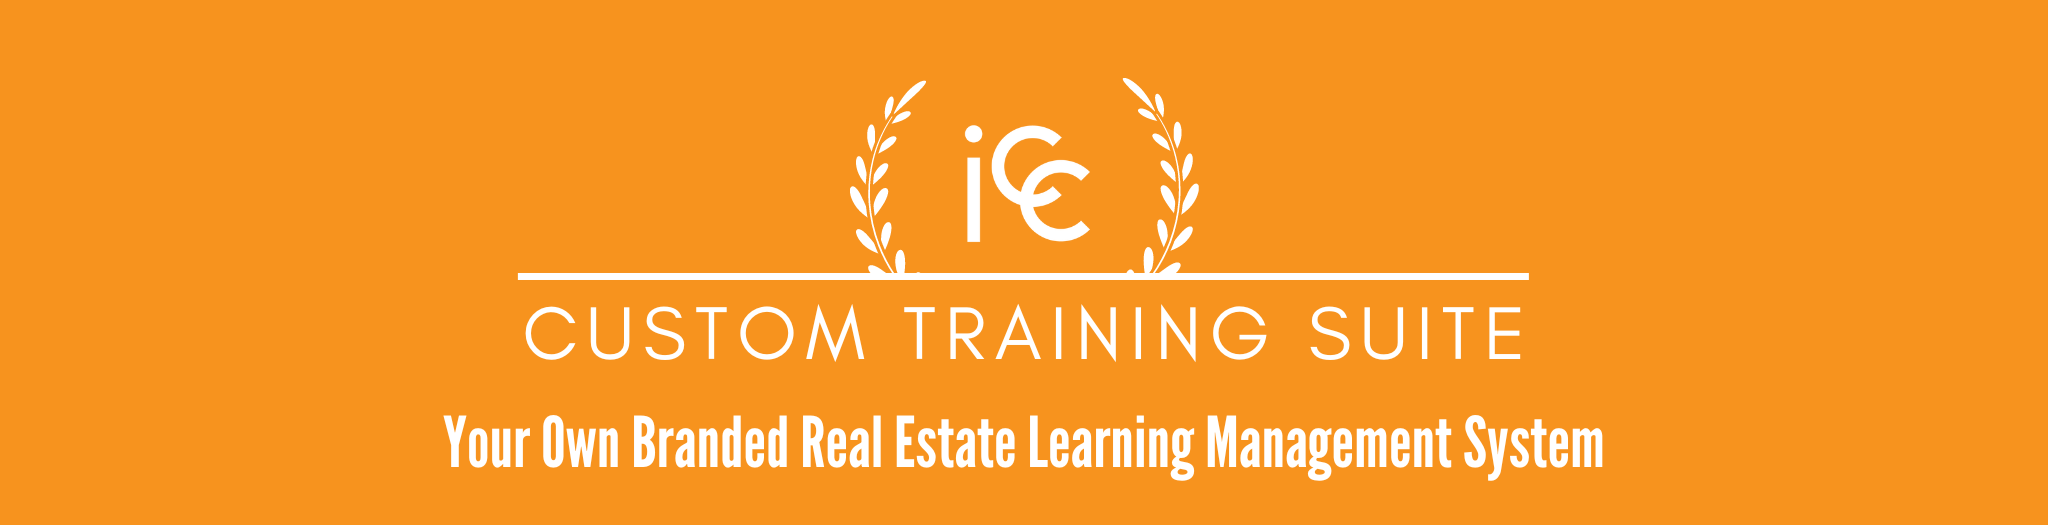 custom training suite - your own branded real estate learning management system